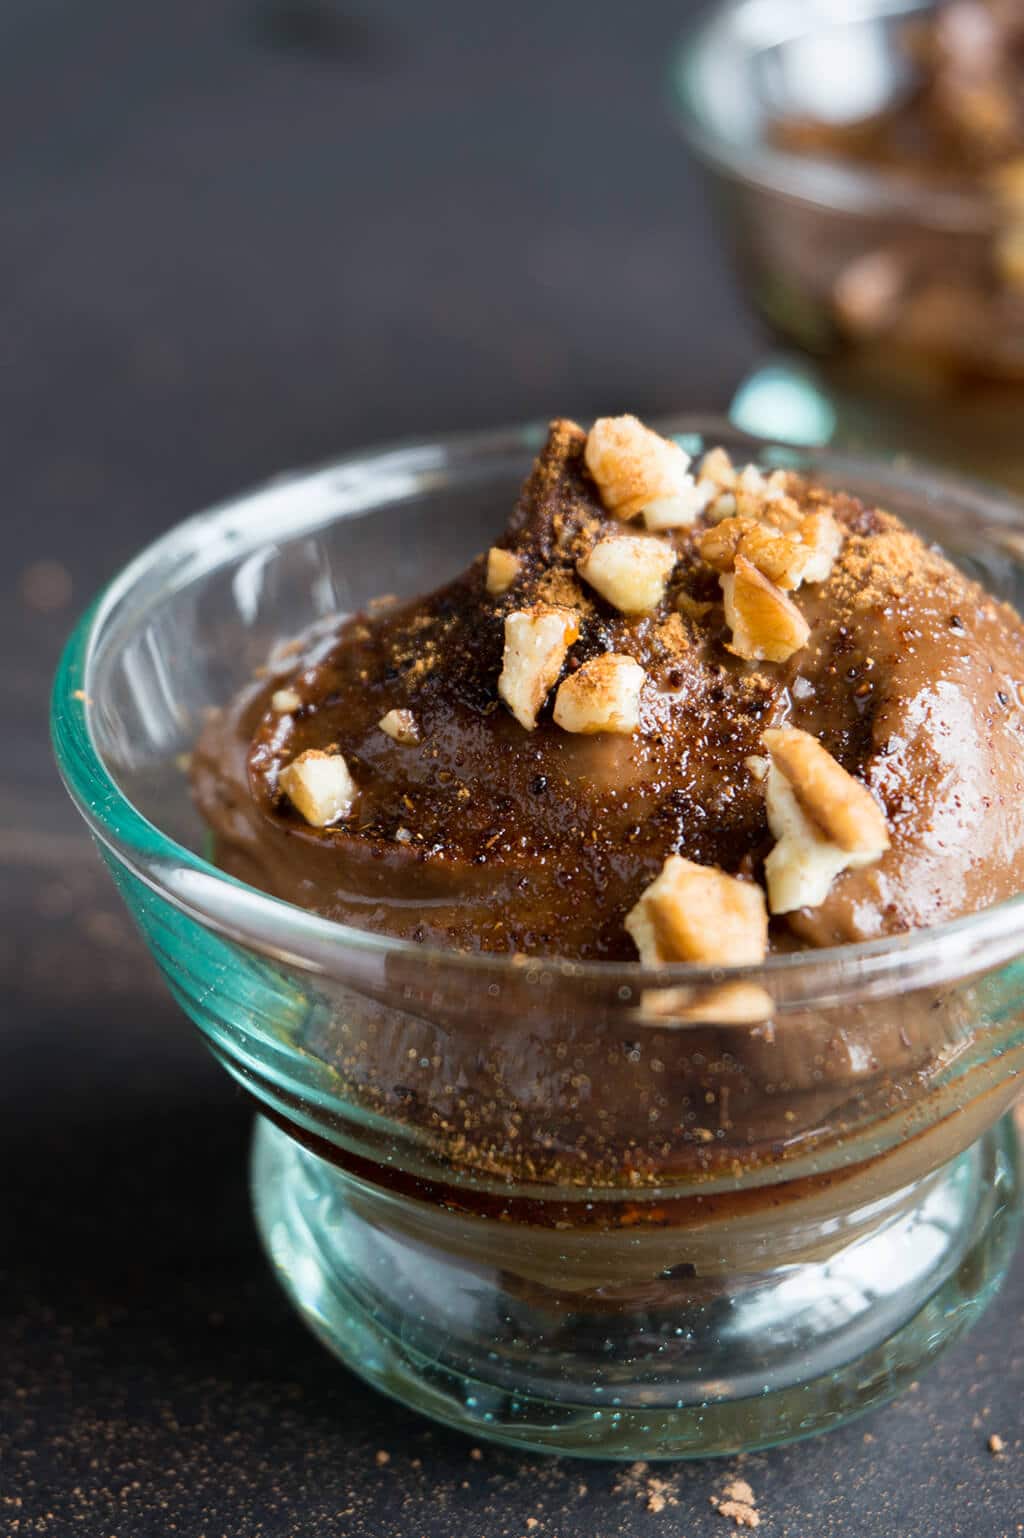 Chocolate Avocado Pudding in glass